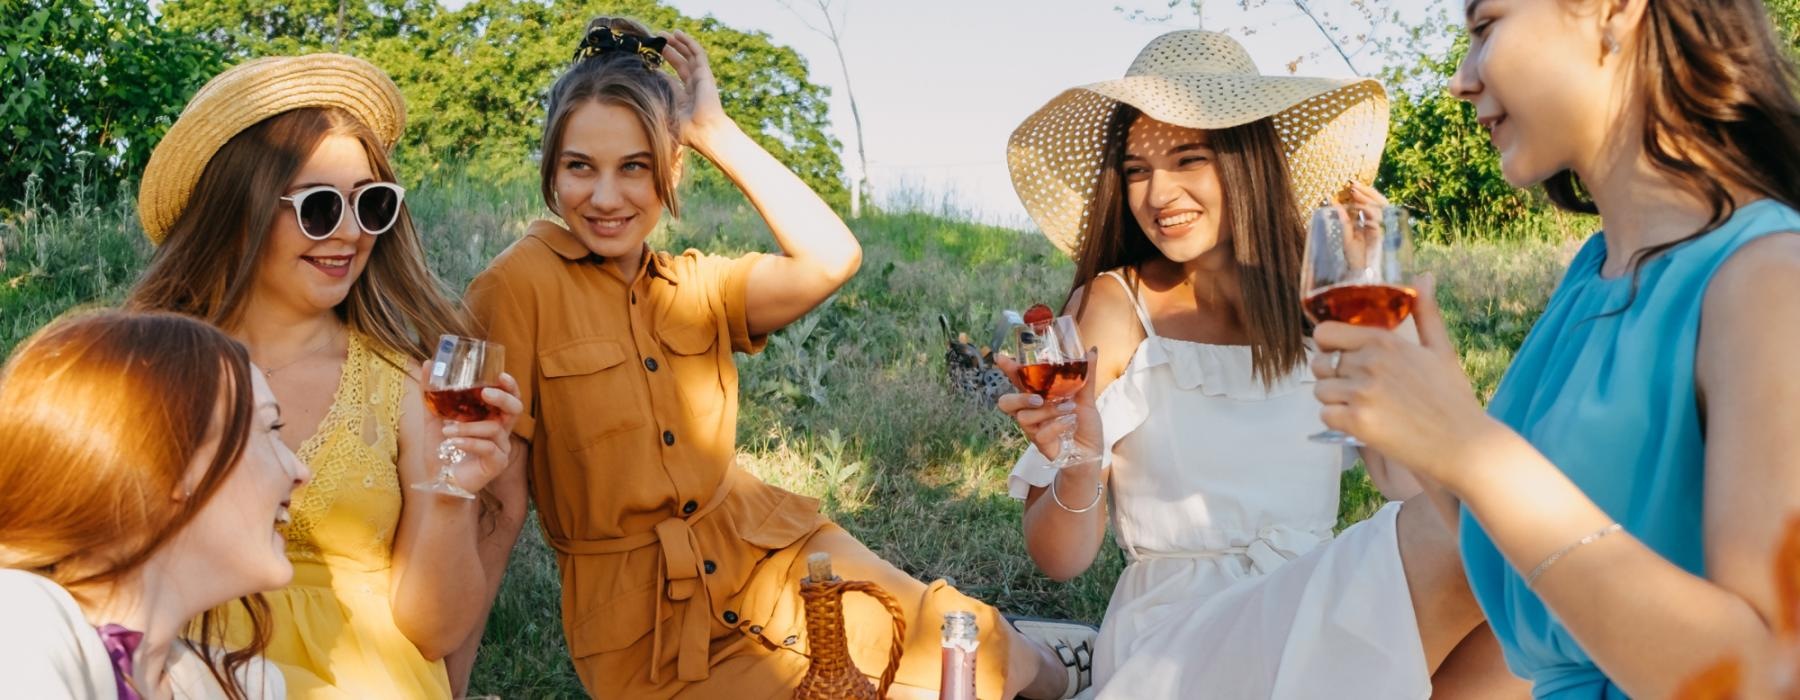 Lifestyle photo of a group of women sitting outside smiling and drinking